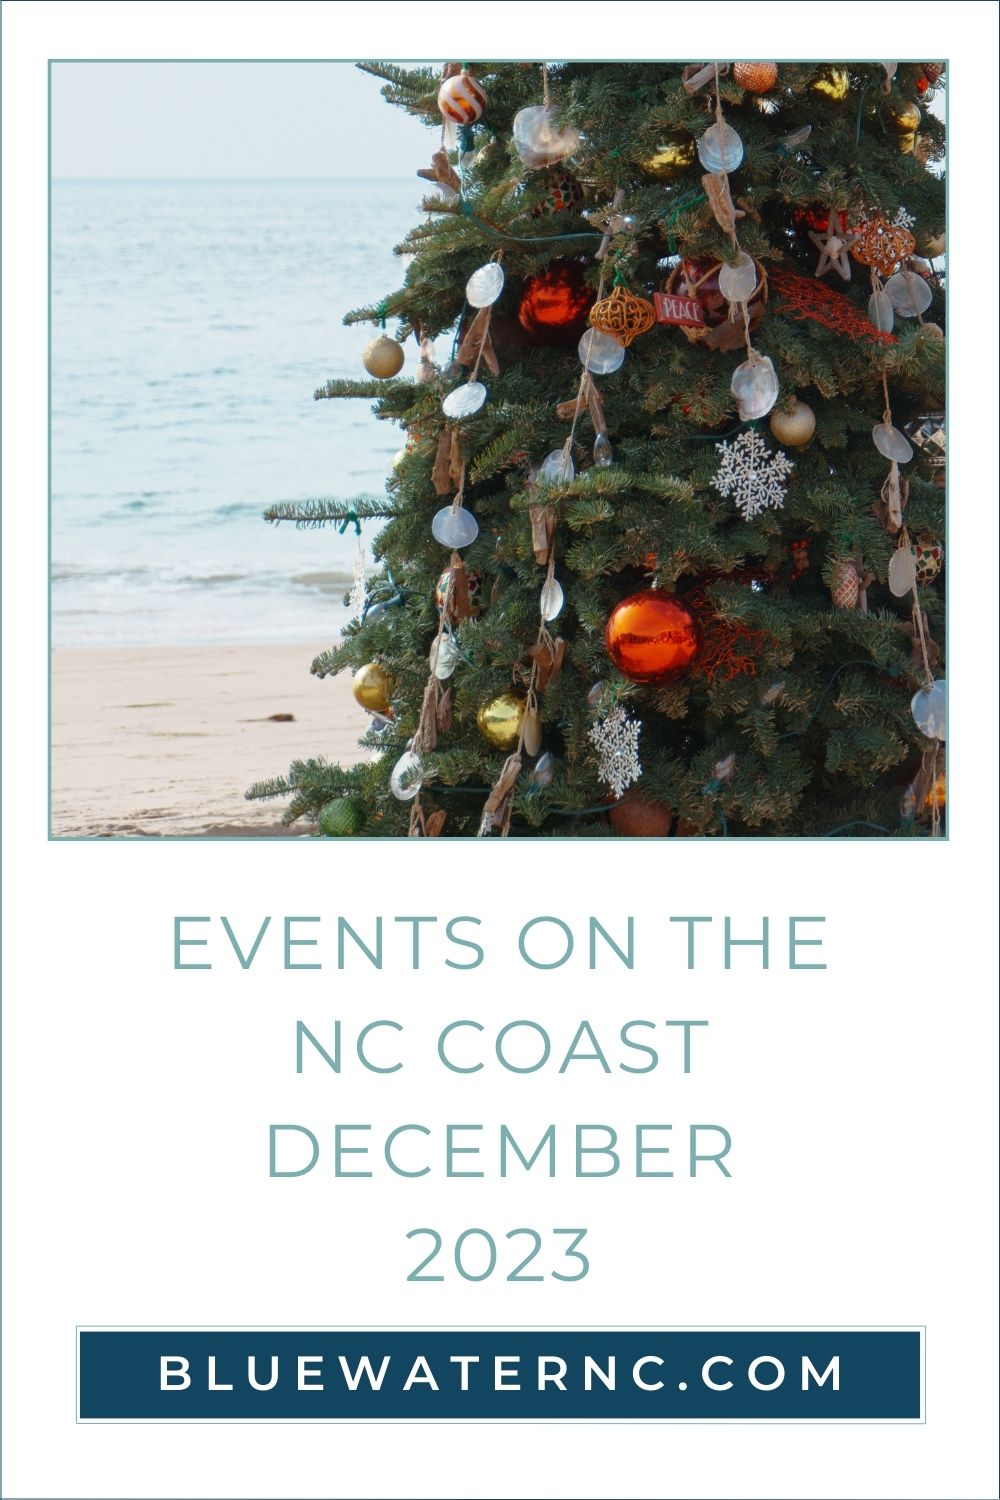 Events on the NC coast December